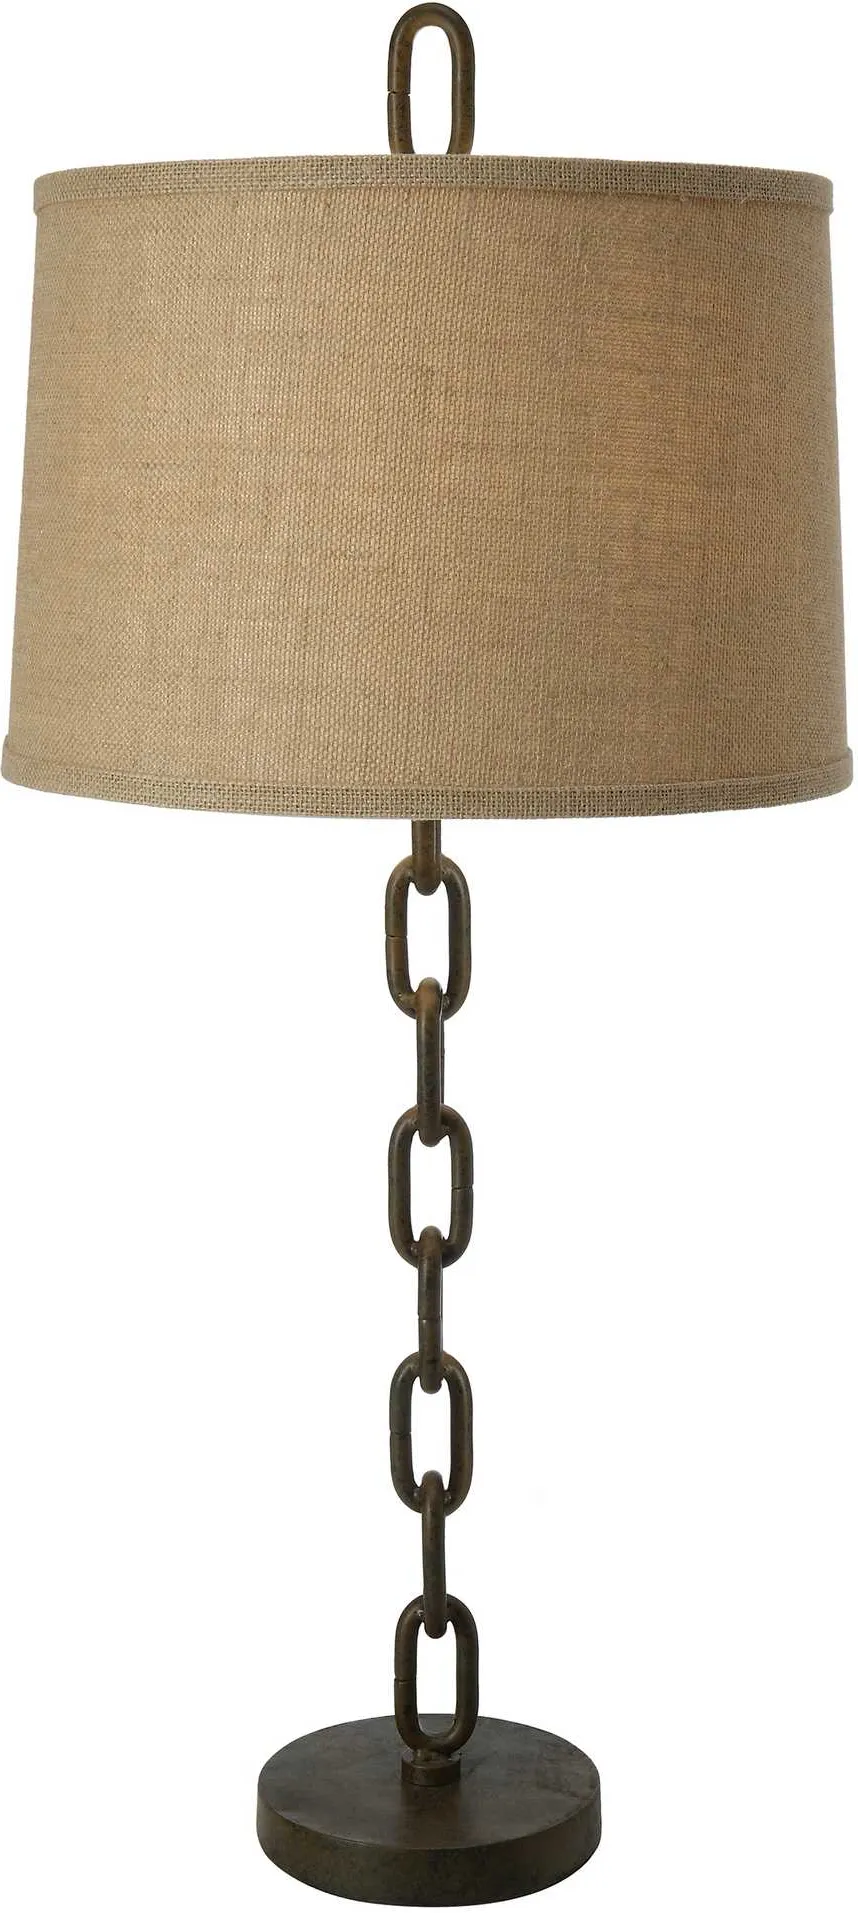 Crestview Collection Link Rustic Metal Table Lamp